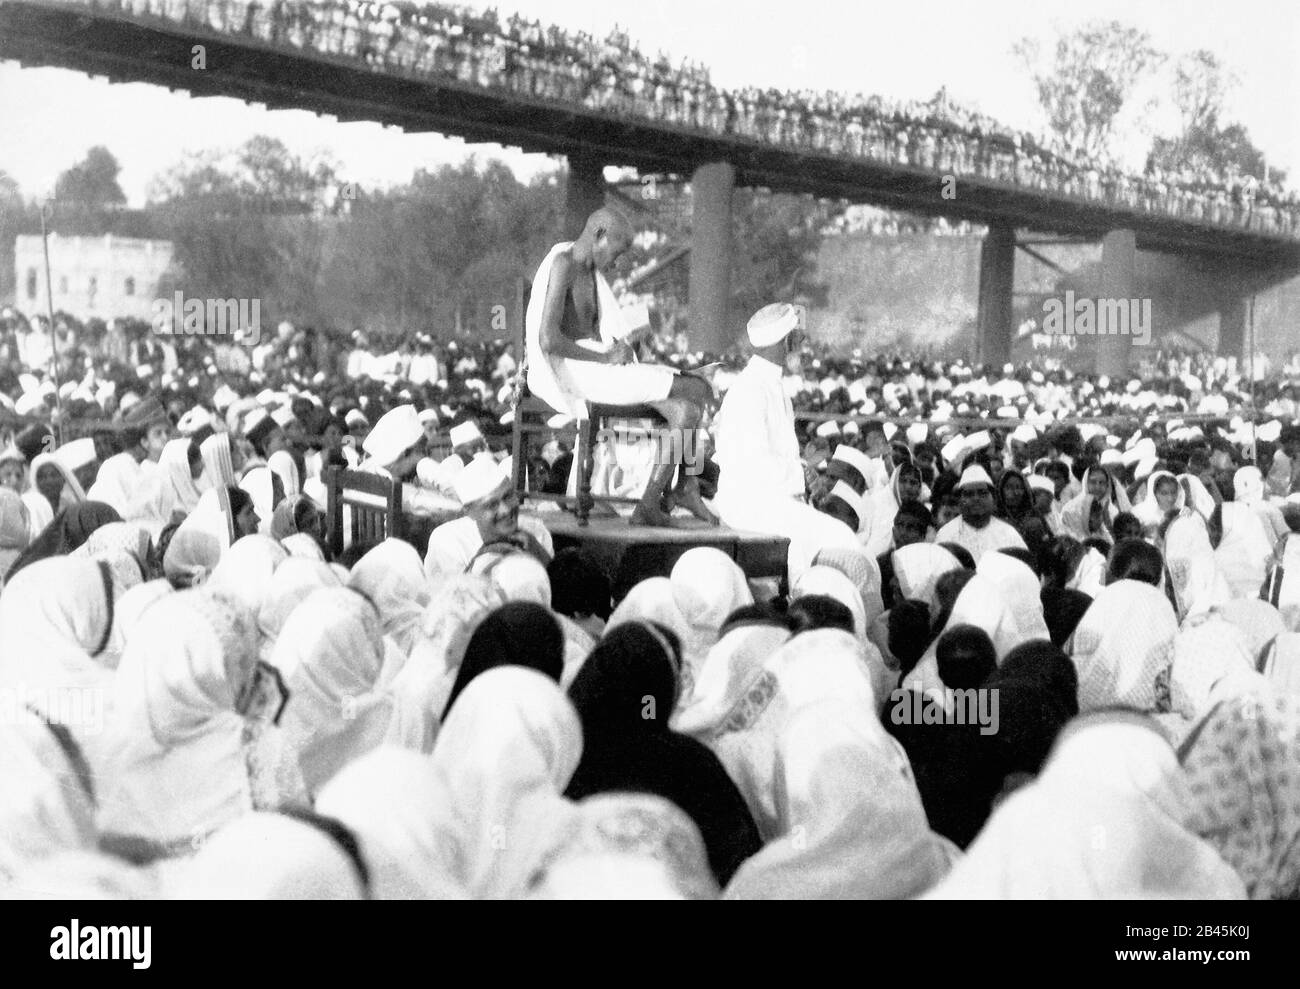 Mahatma Gandhi talking to the crowd on the dry river bed of Sabarmati river, Ahmedabad, Gujarat, India, Asia, 11 March 1930, old vintage 1900s picture Stock Photo